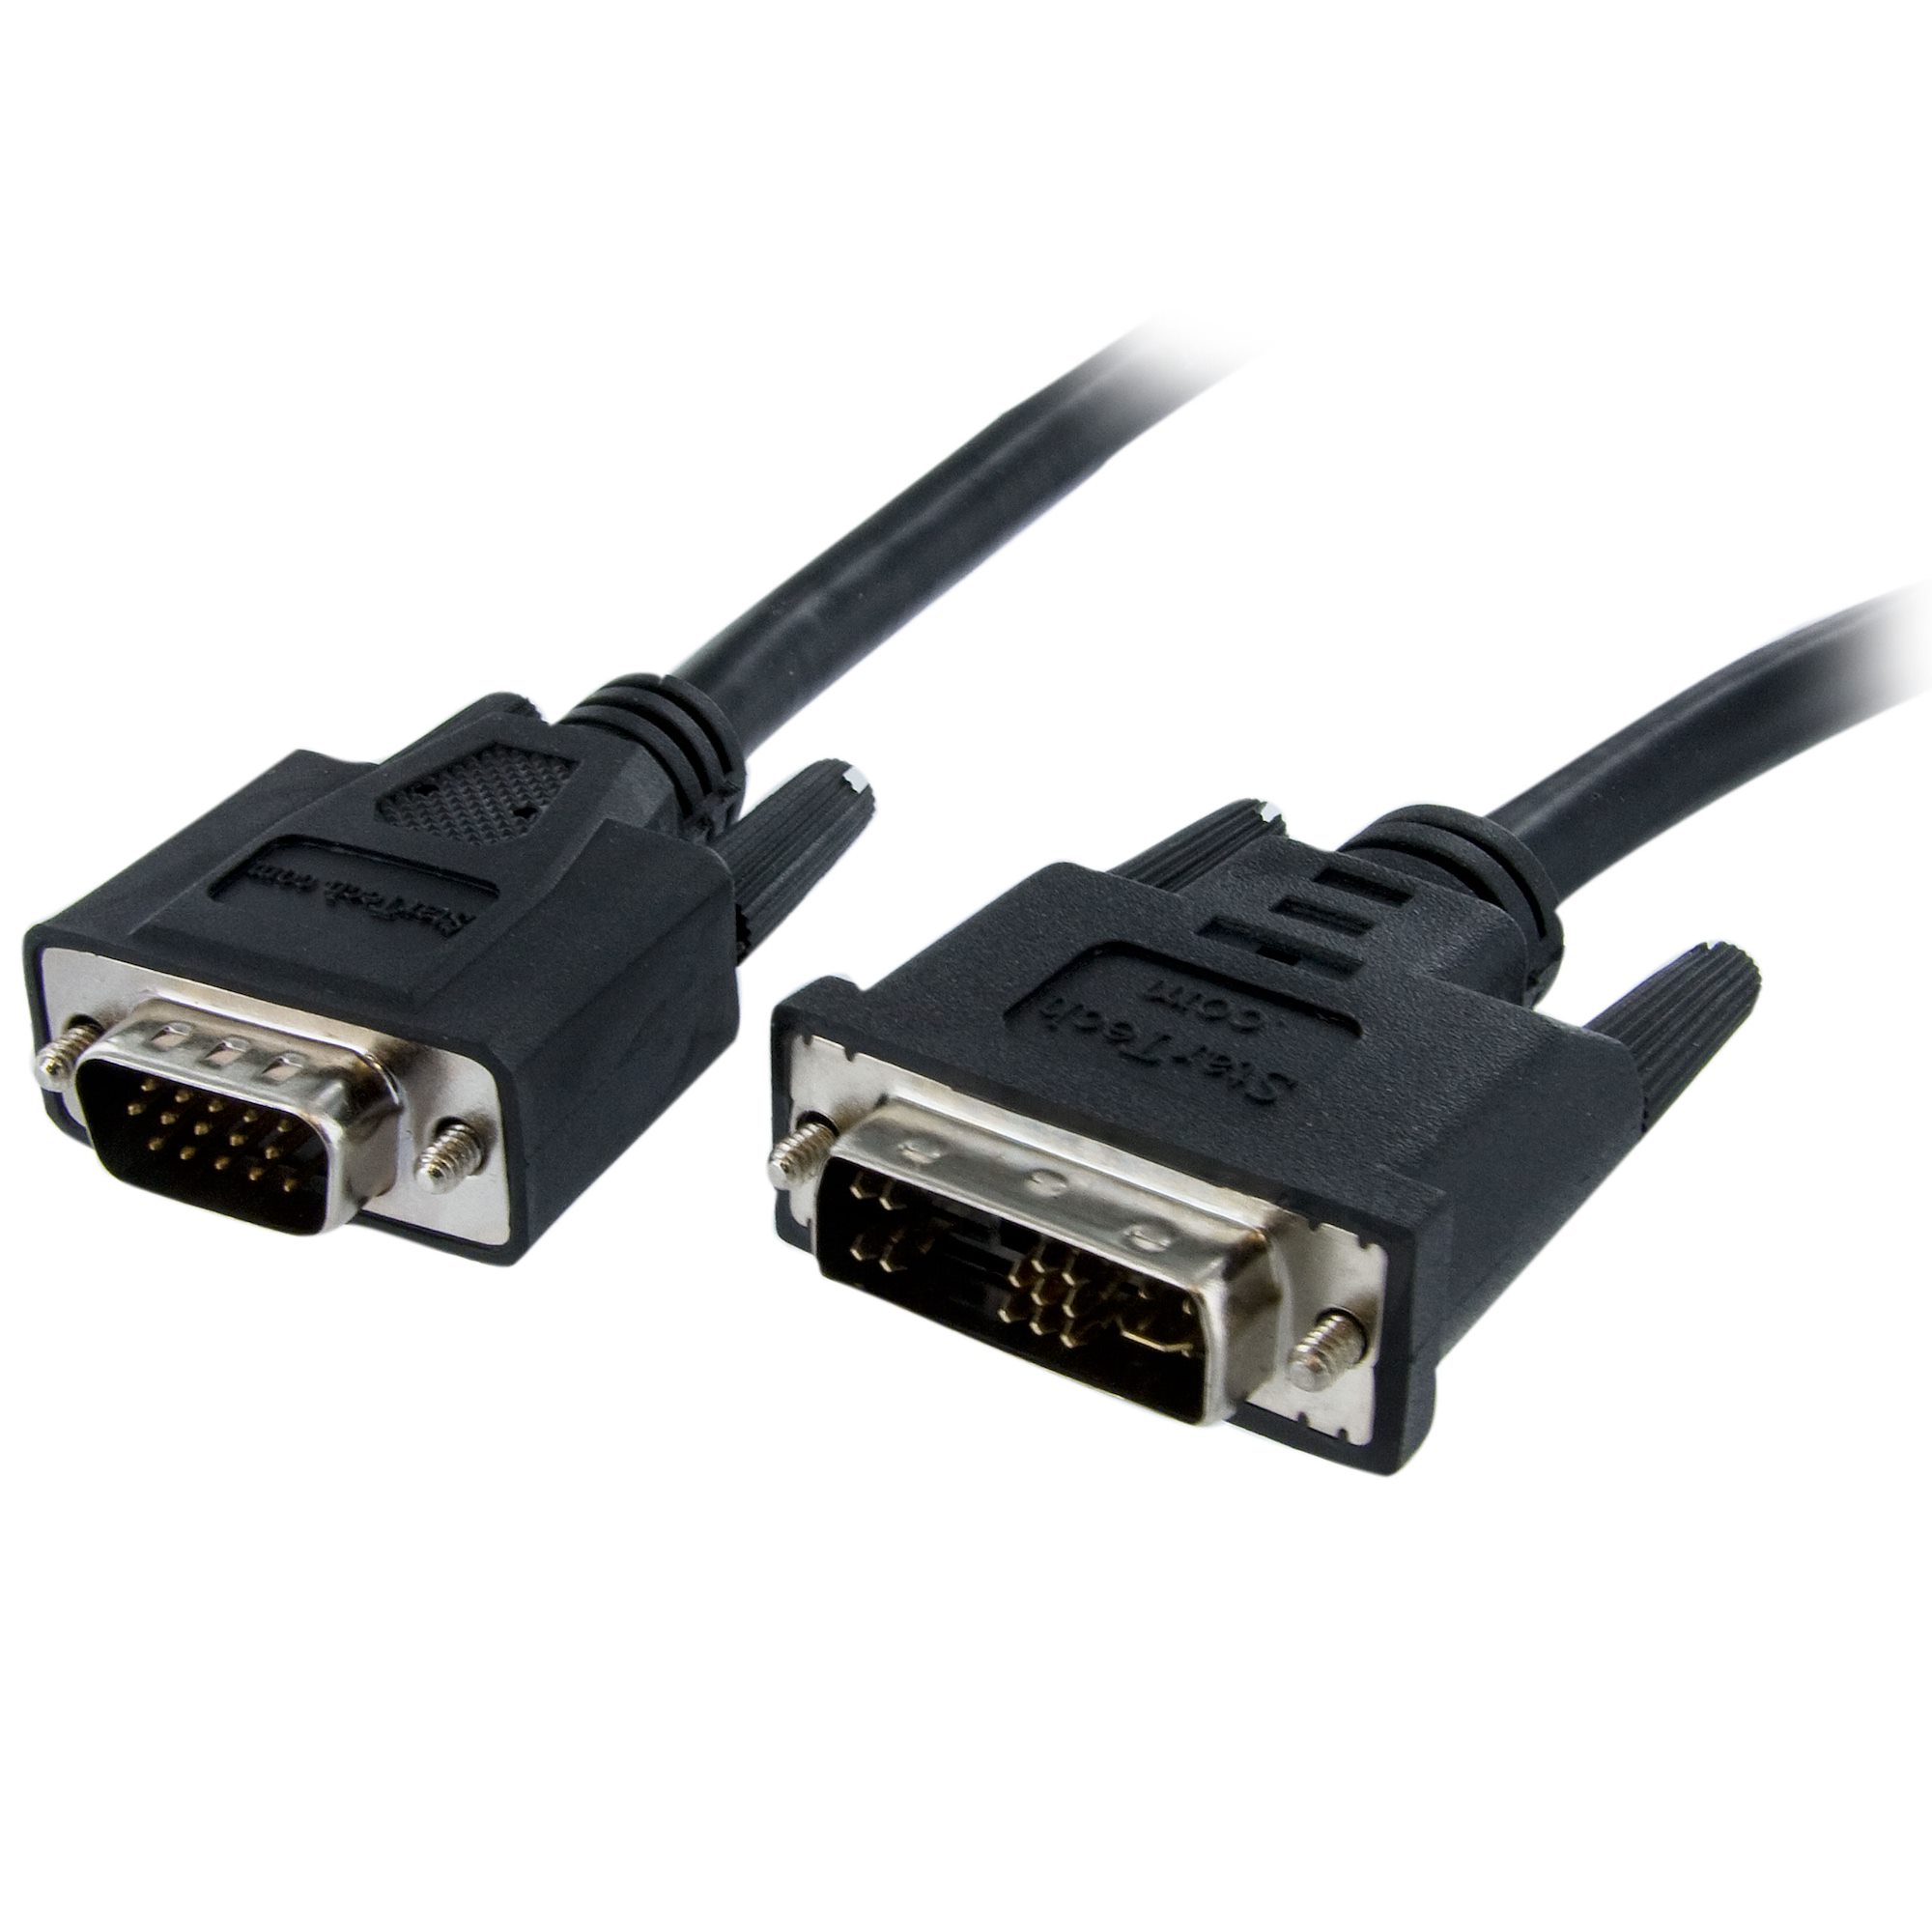 6-Feet Coupler Extend Extender VGA Cable for Connection from Computer to Monitor 